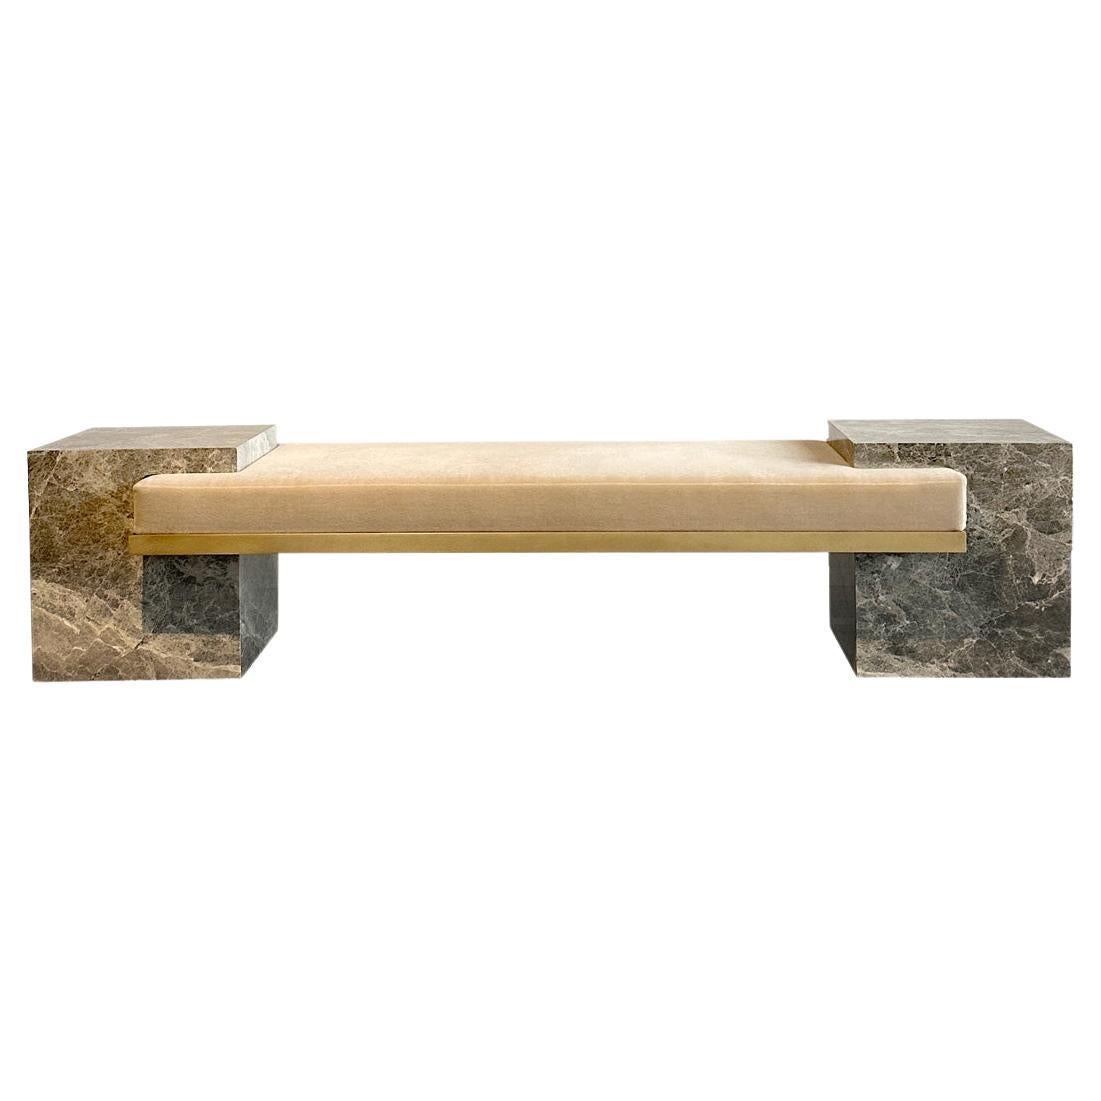 The coexist bench uses balance and delicate harmony of materials meeting. The bench consists of a brushed brass frame, Fior di Bosco marble cubes, and mattress upholstered in cream mohair fabric. This elegant and symmetrical piece is perfect for a